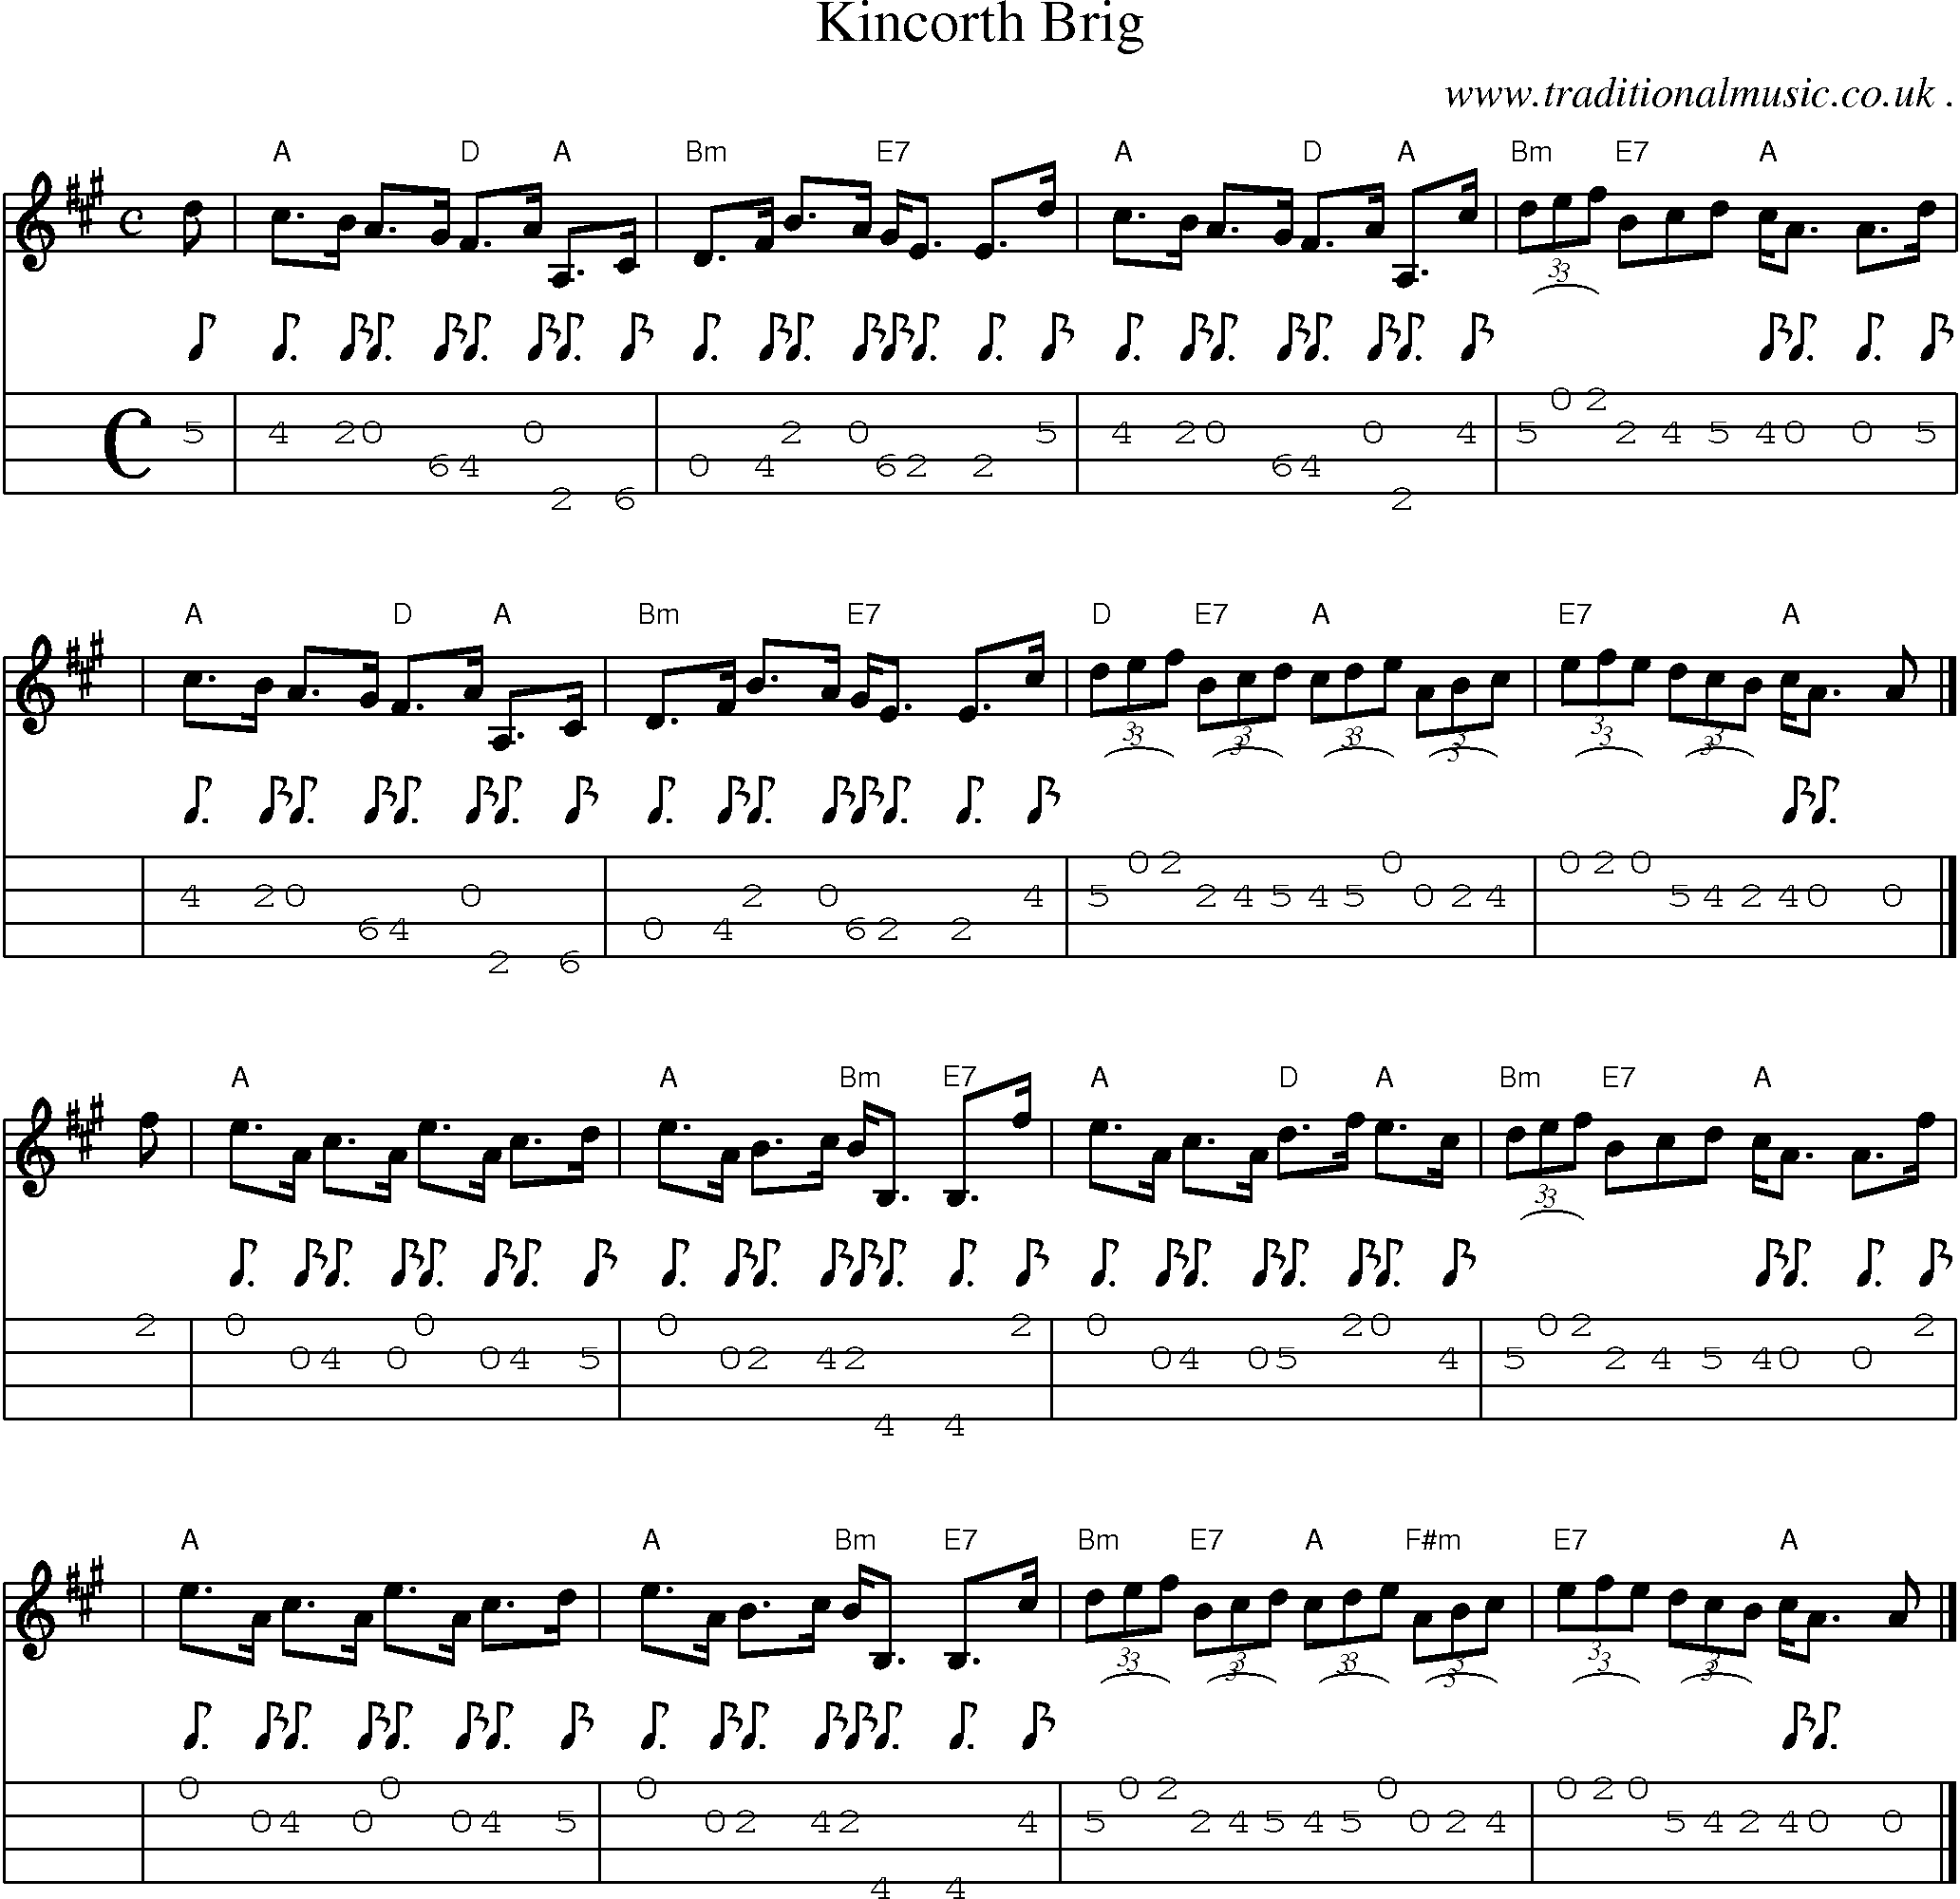 Sheet-music  score, Chords and Mandolin Tabs for Kincorth Brig